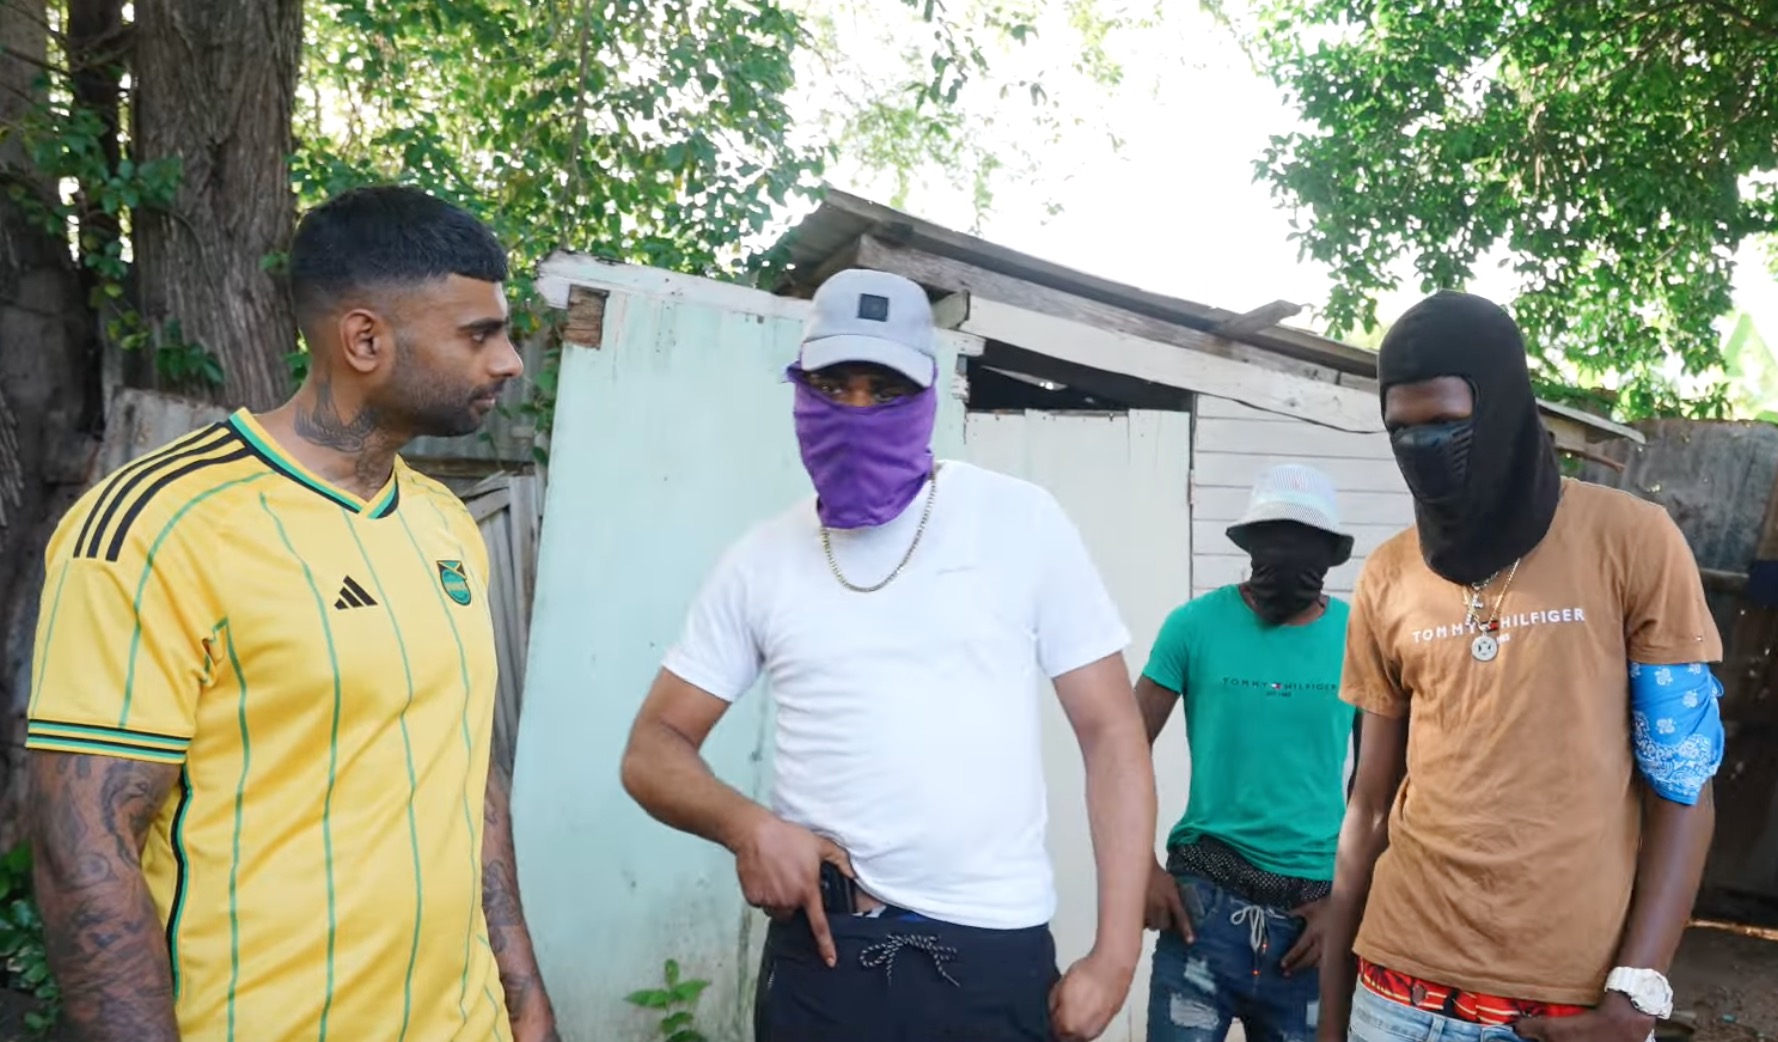 The Life of Some of Jamaica's Most Dangerous Gang Members